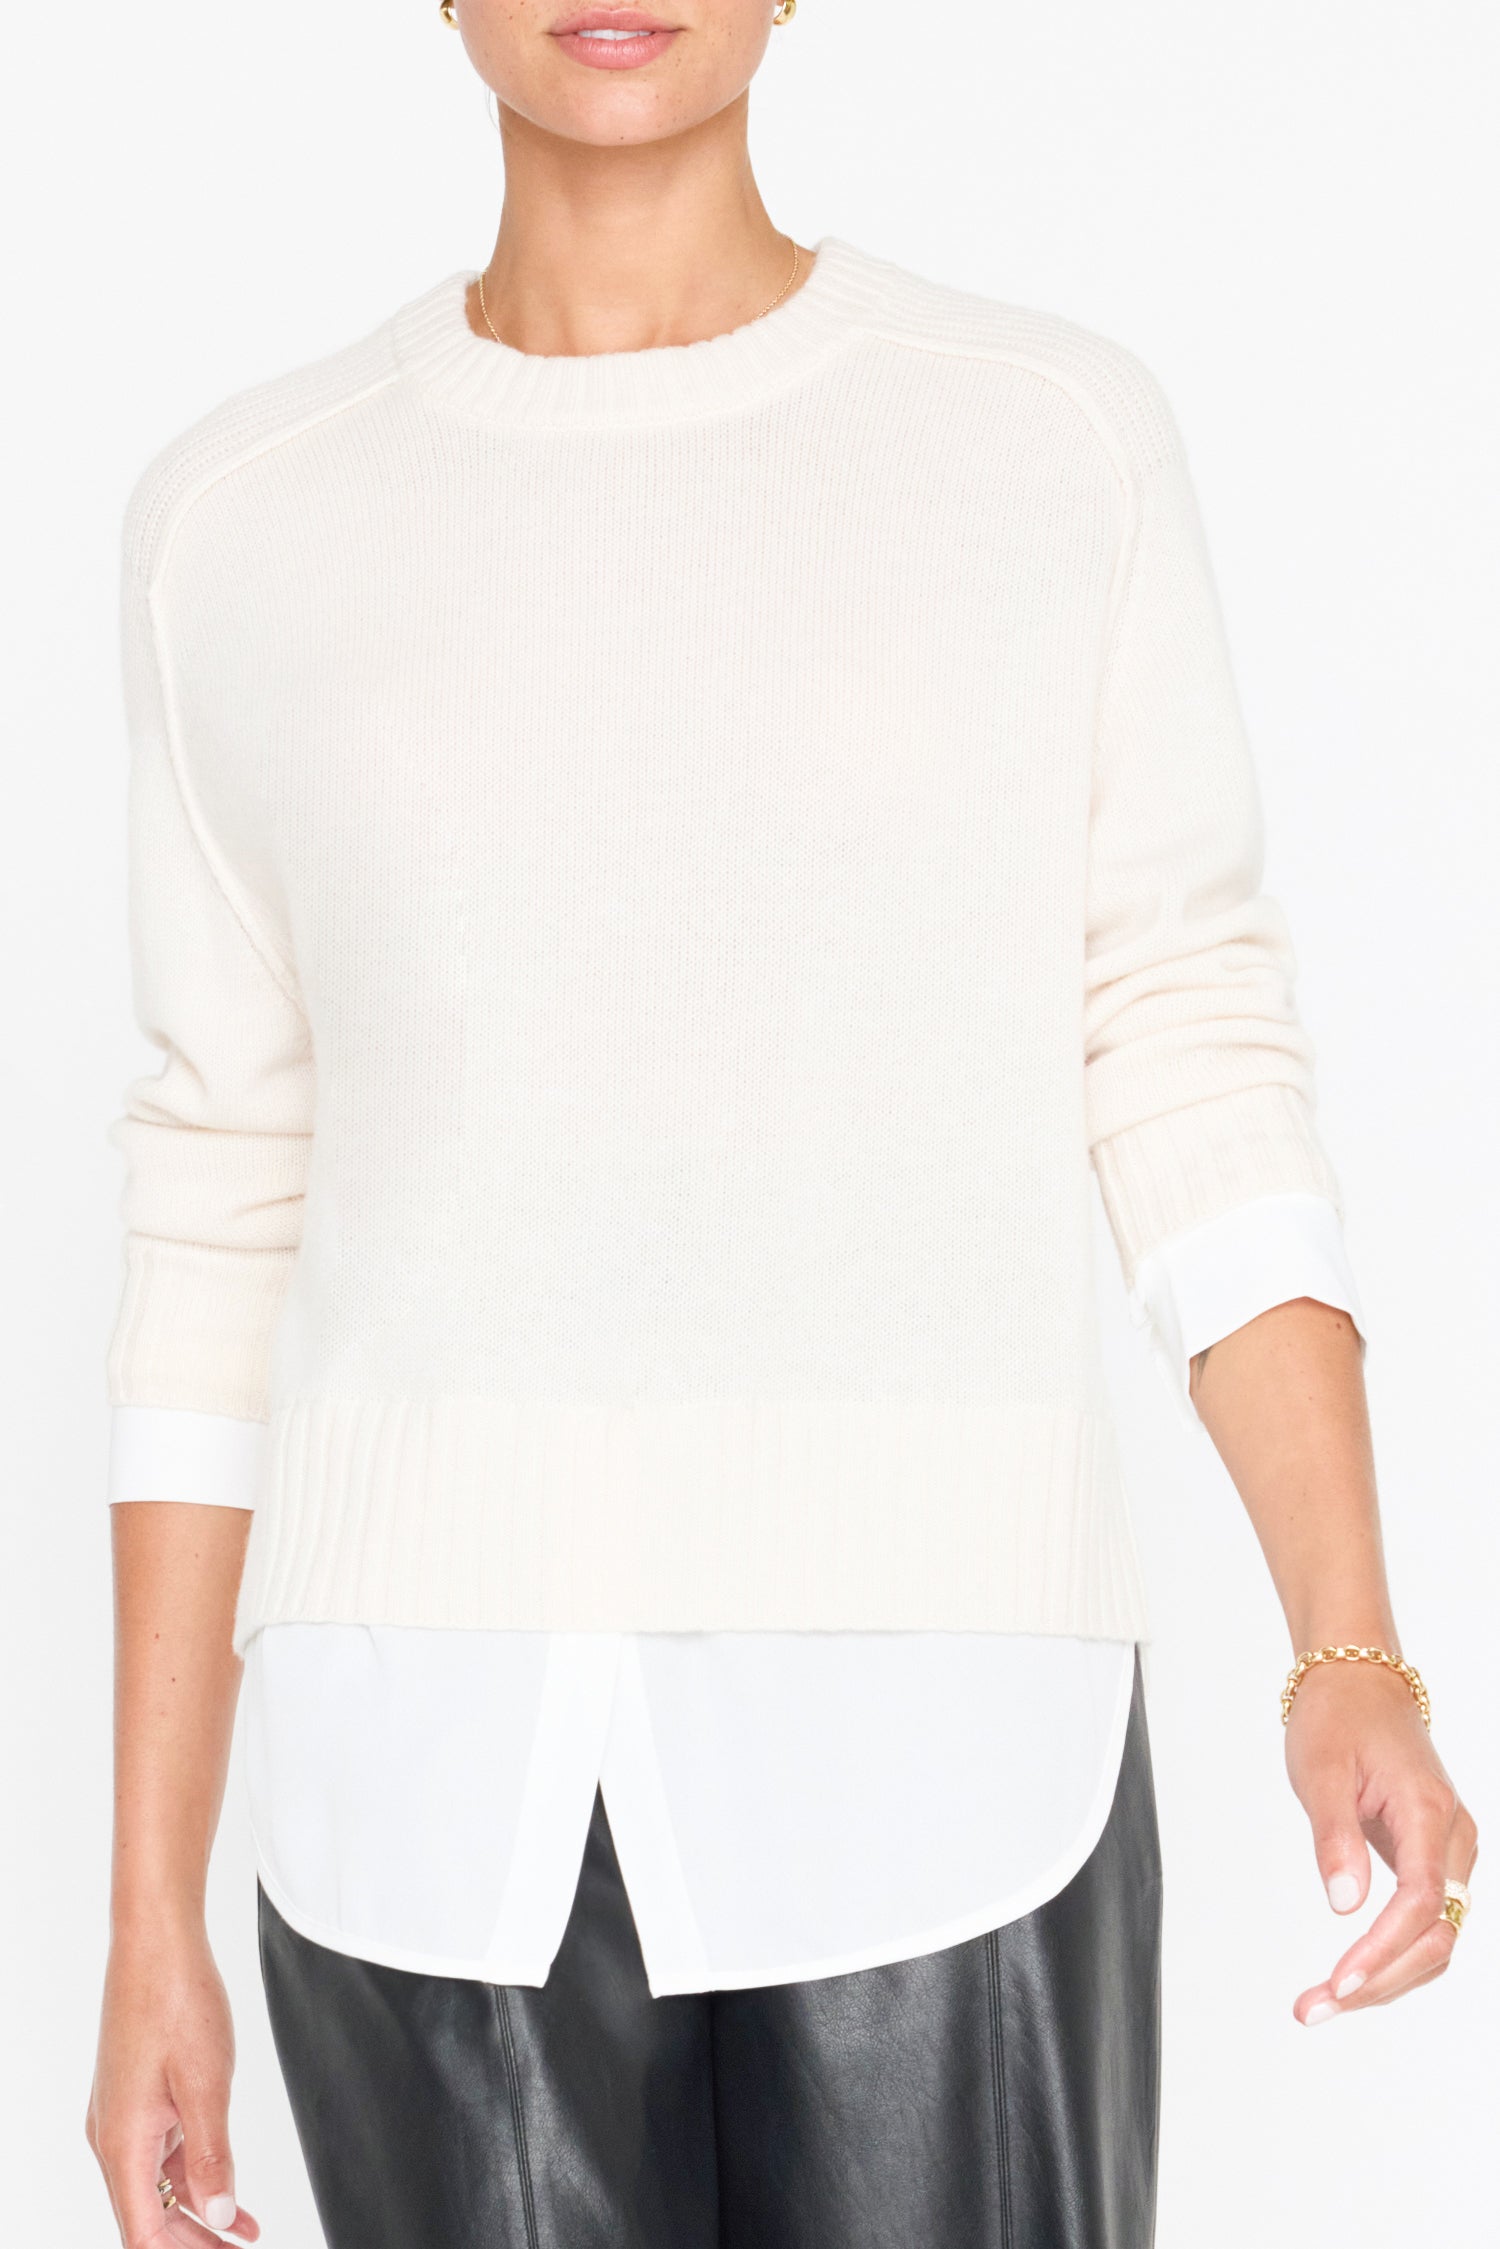 Parson cashmere-wool layered crewneck white sweater front view 3